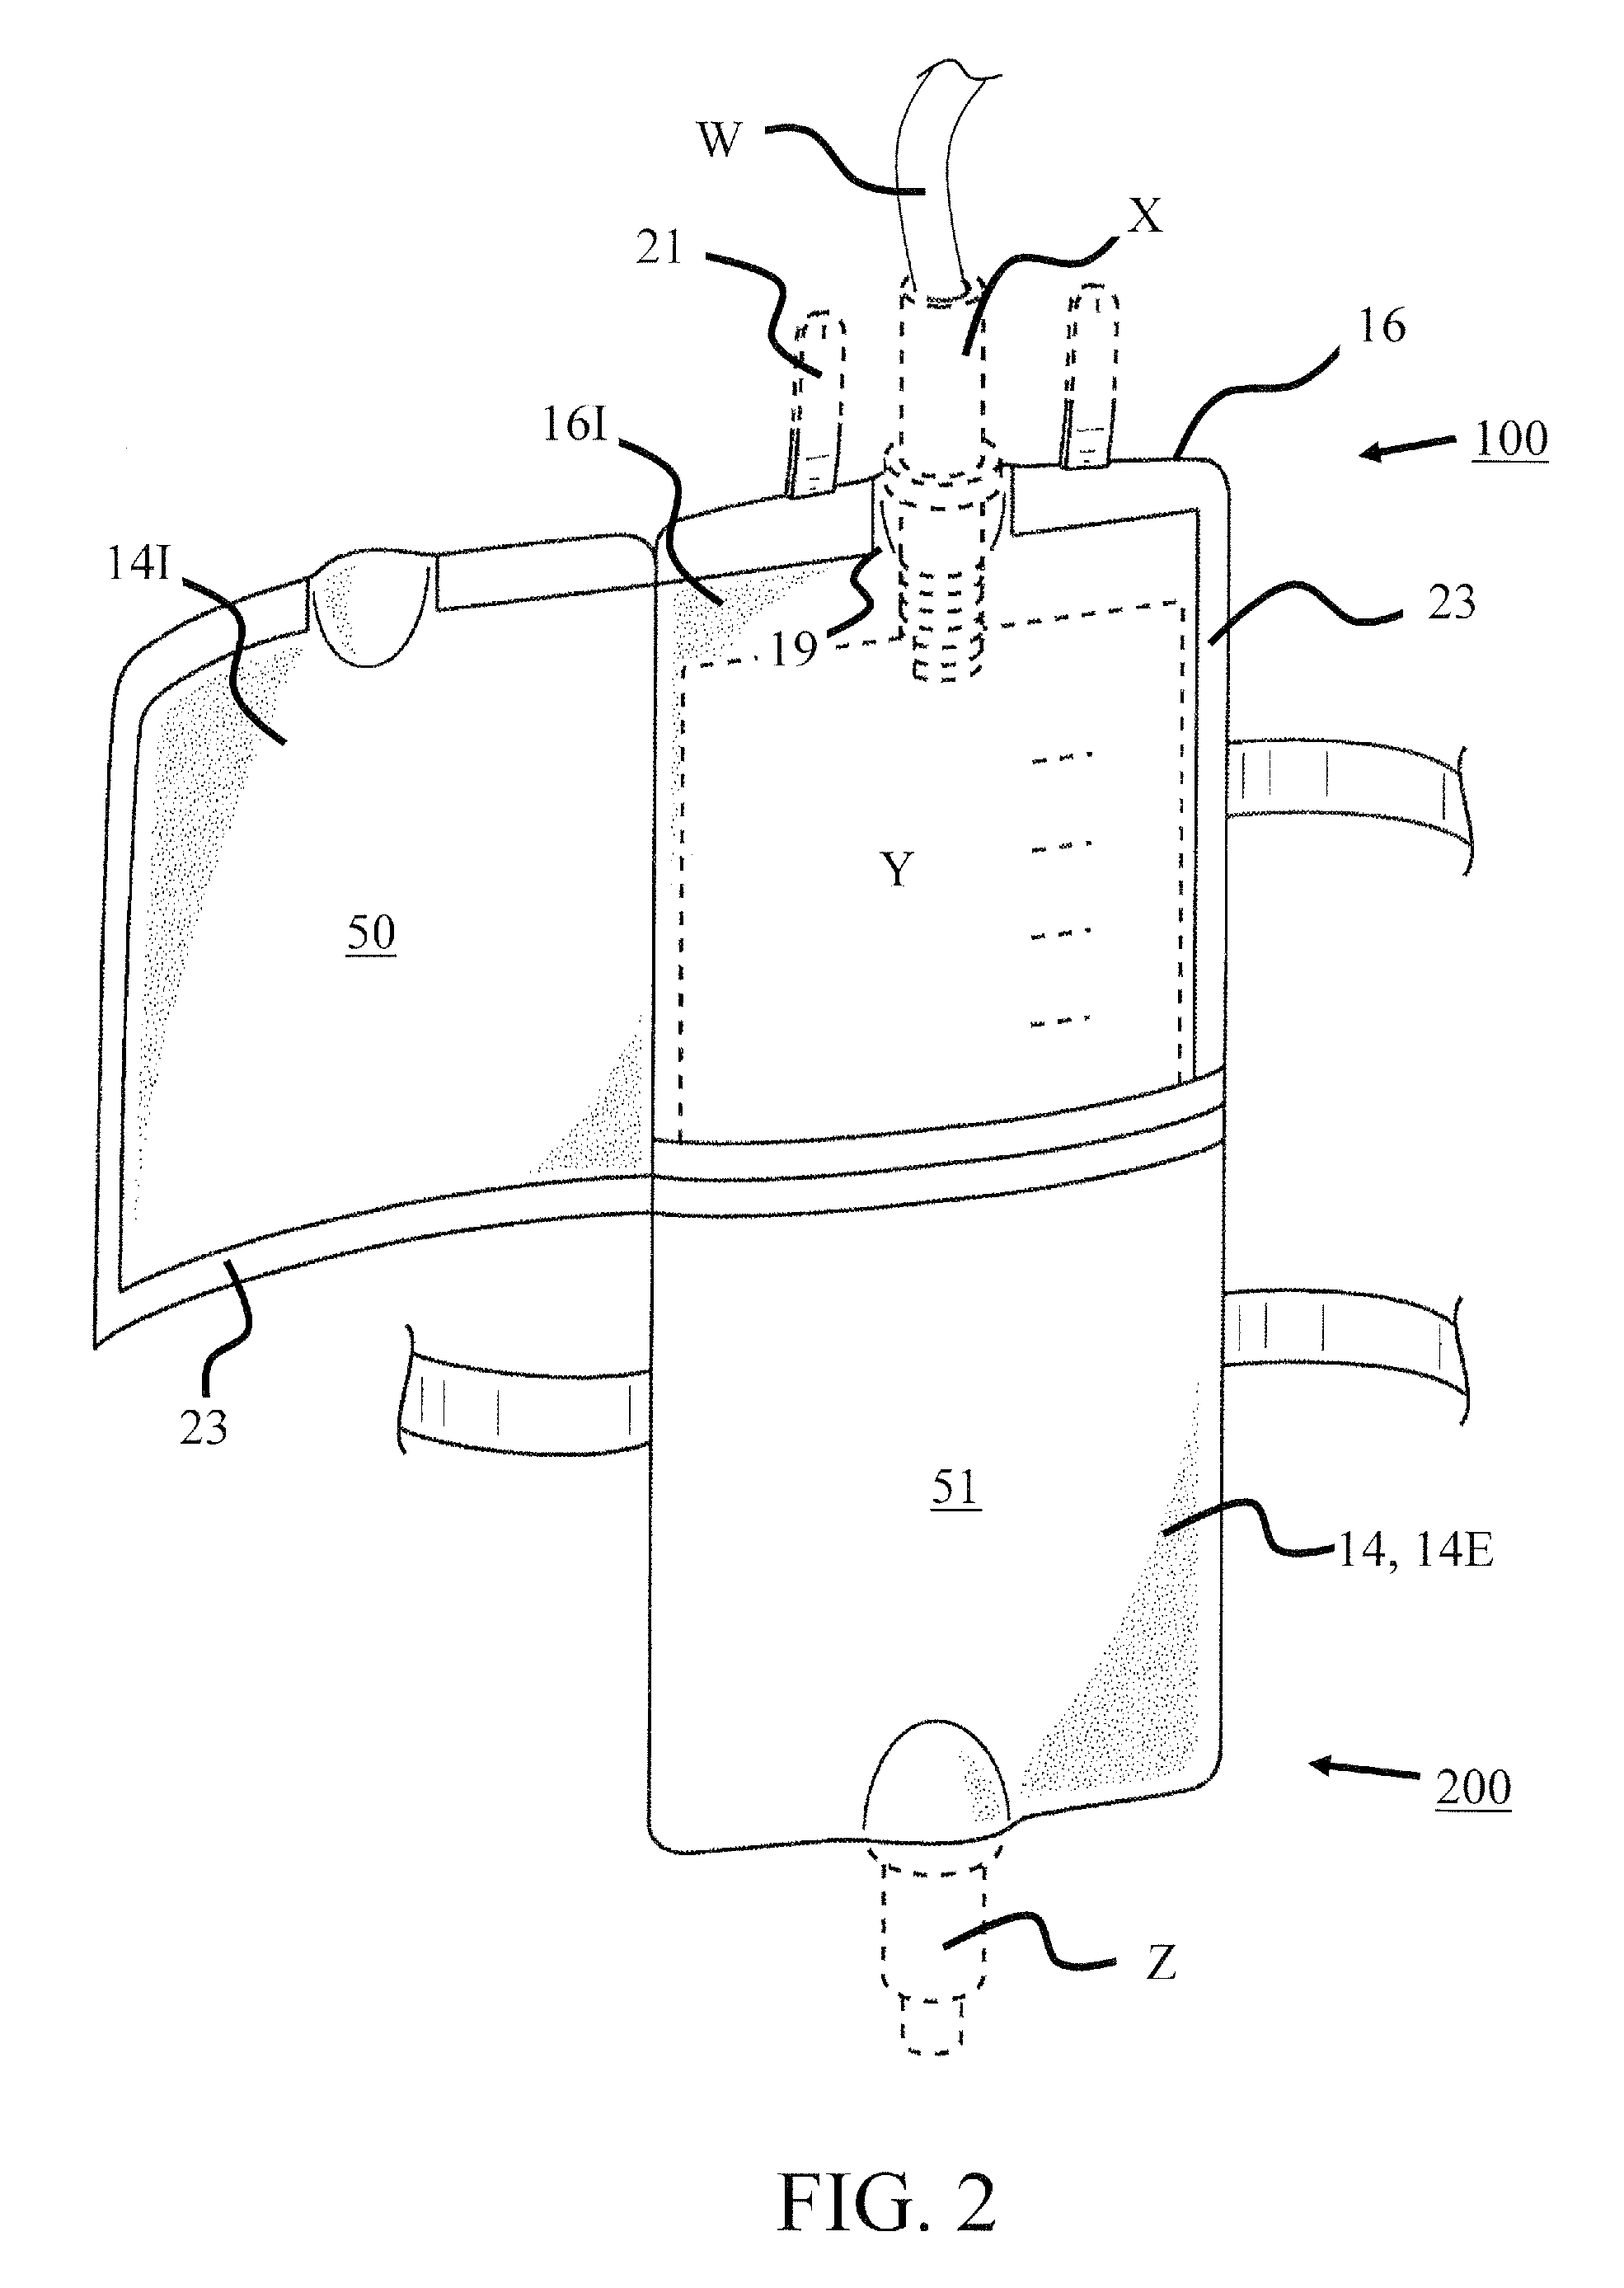 Methods and devices for concealing and securing a urine collection bag